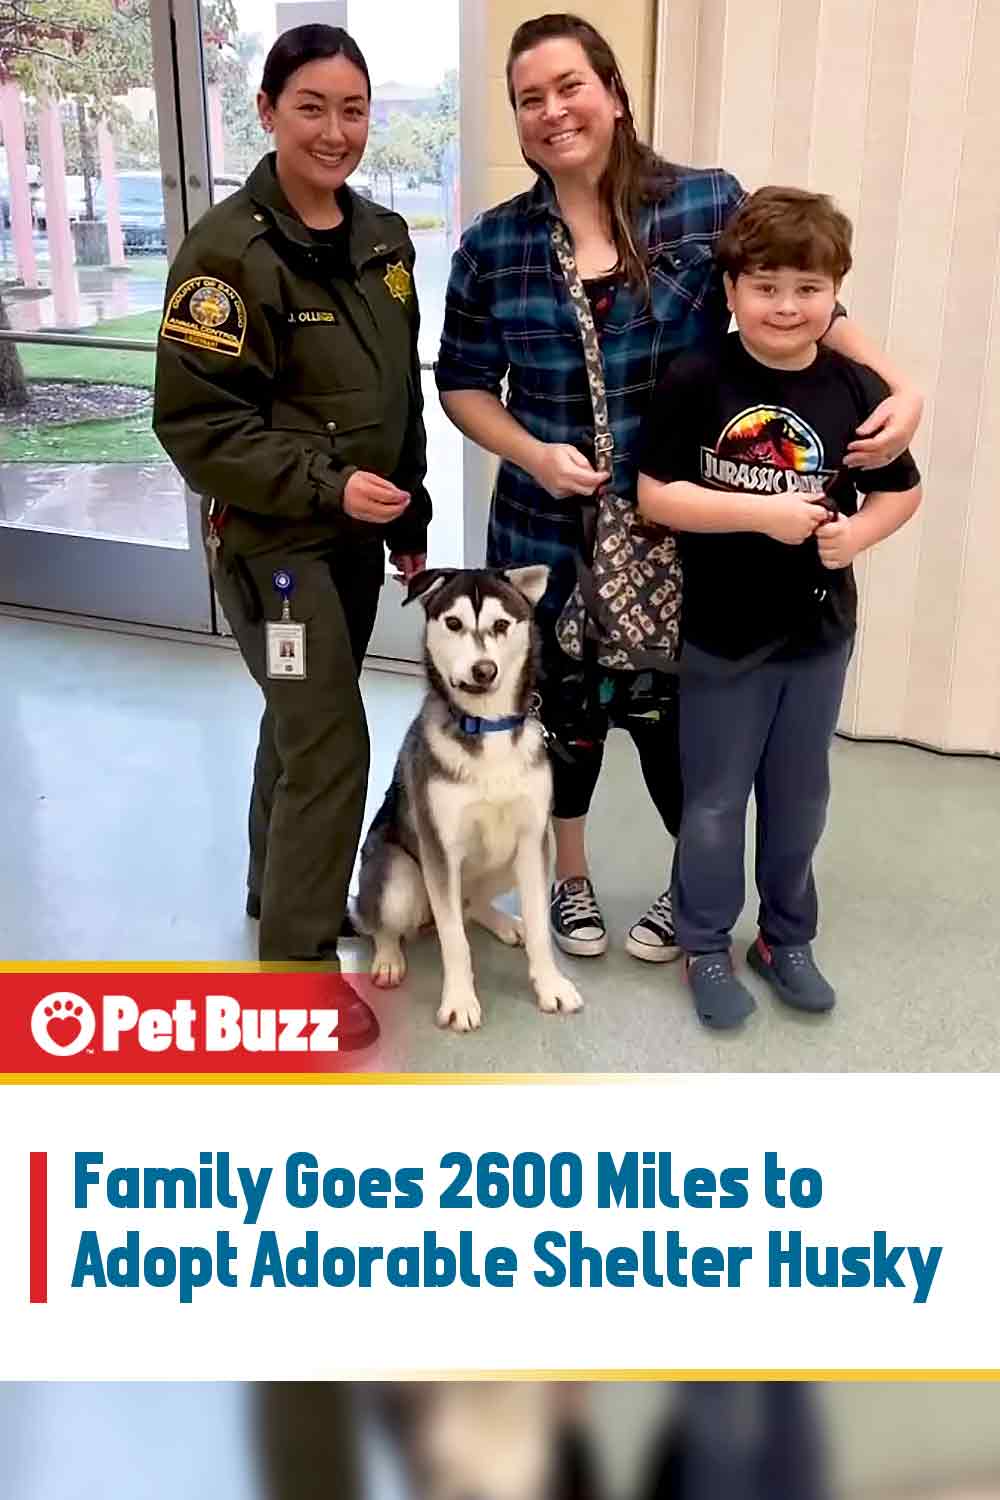 Family Goes 2600 Miles to Adopt Adorable Shelter Husky